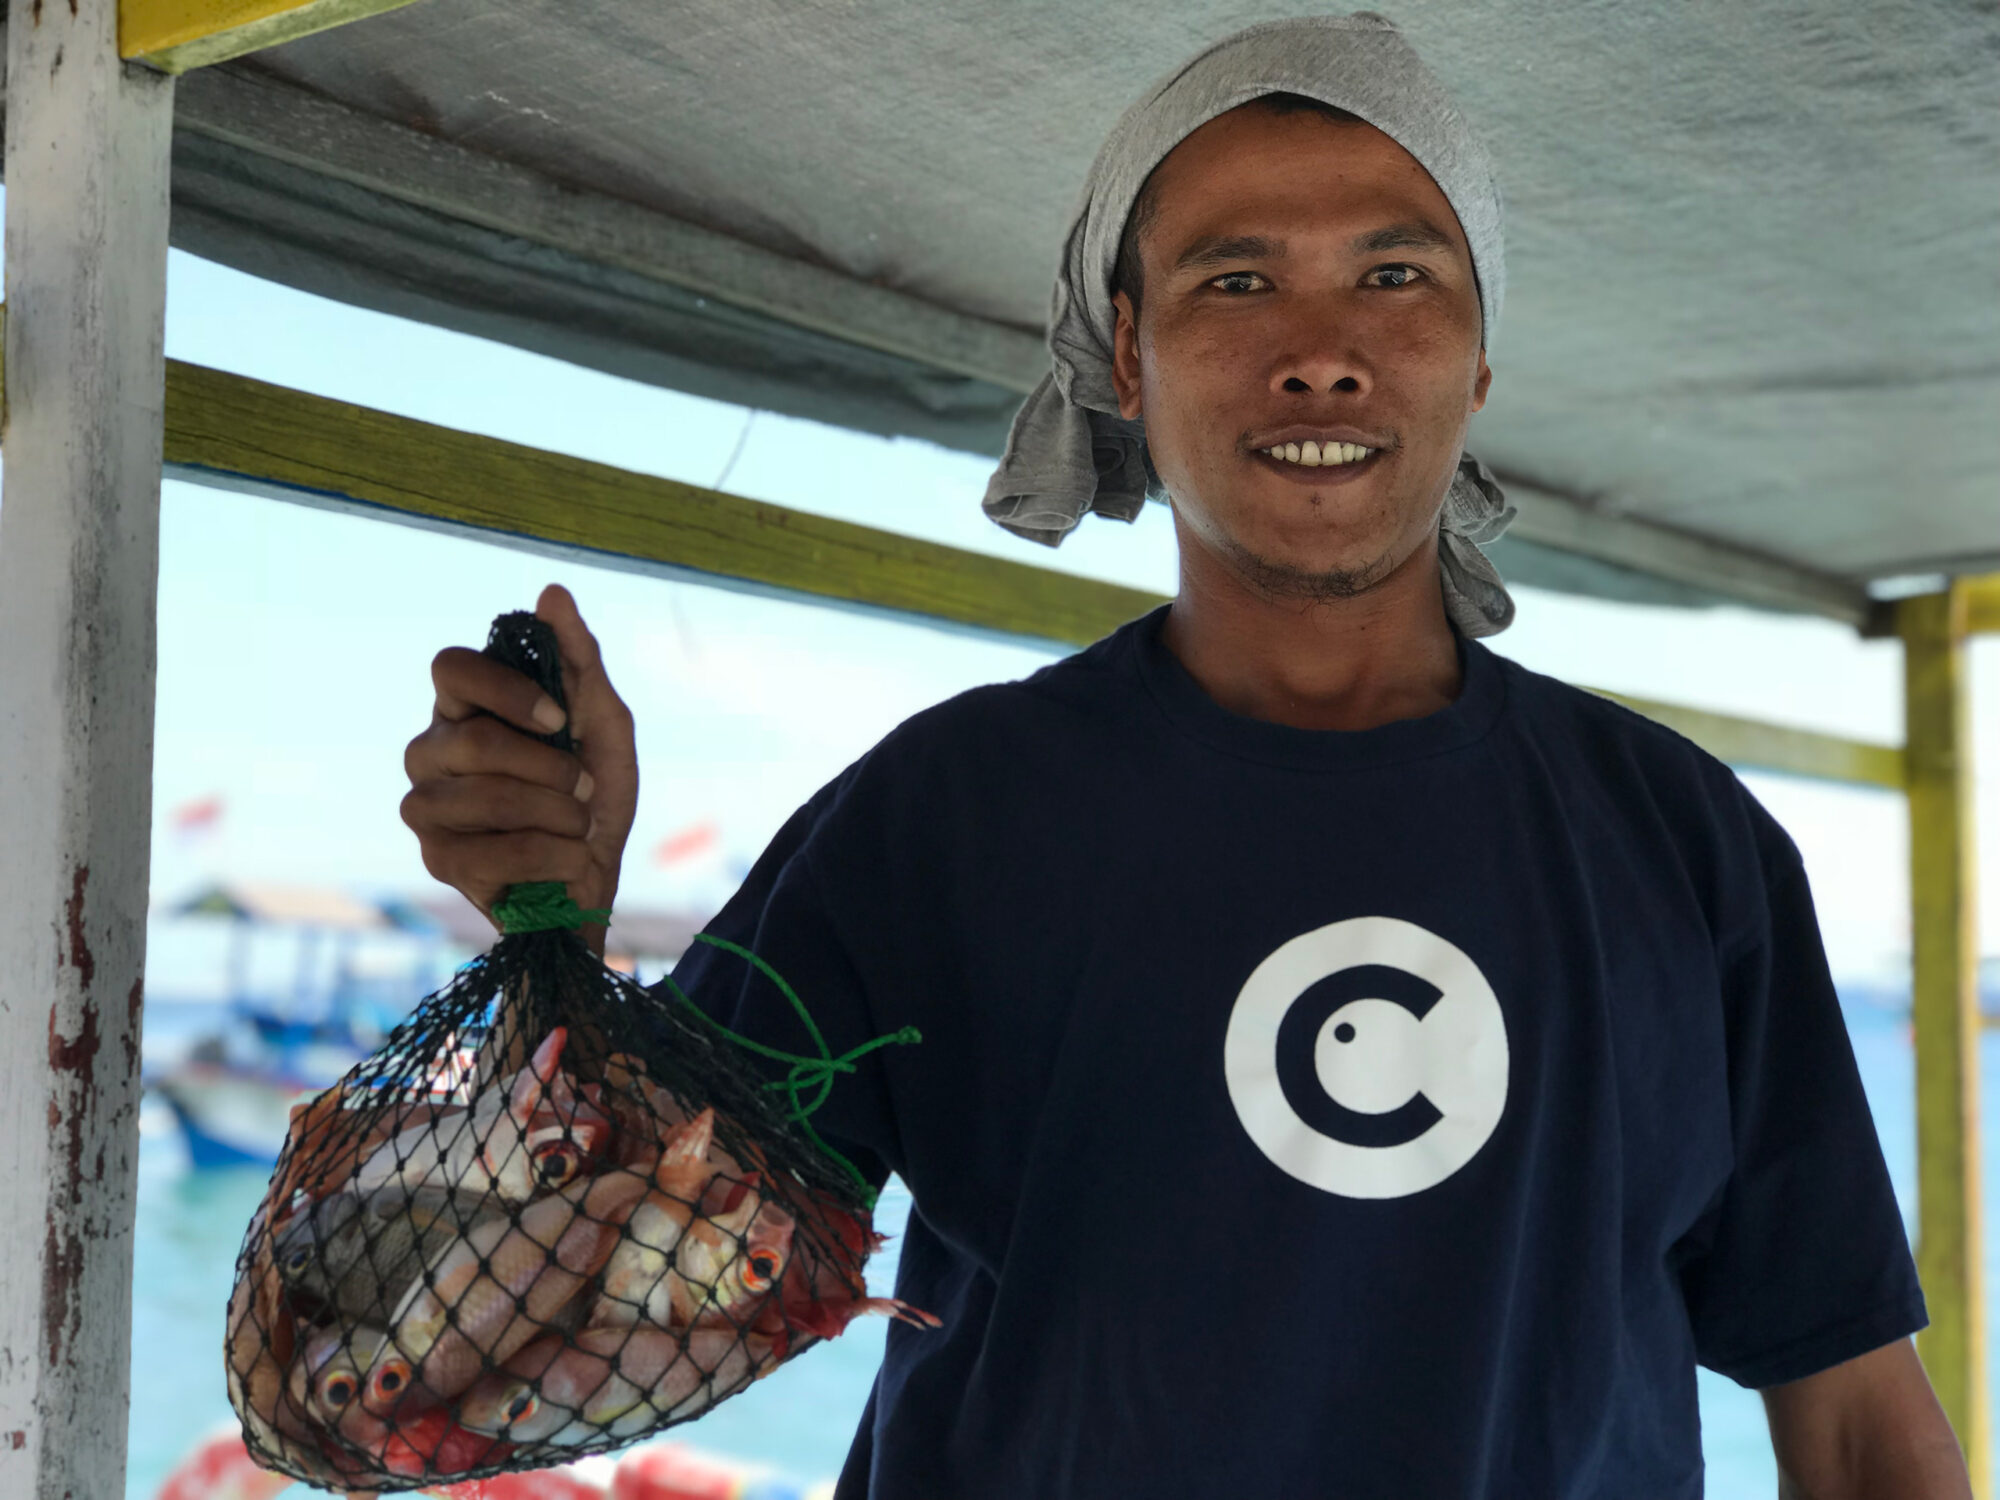 Fishcoin rewarding fishers who share traceability information with buyers.